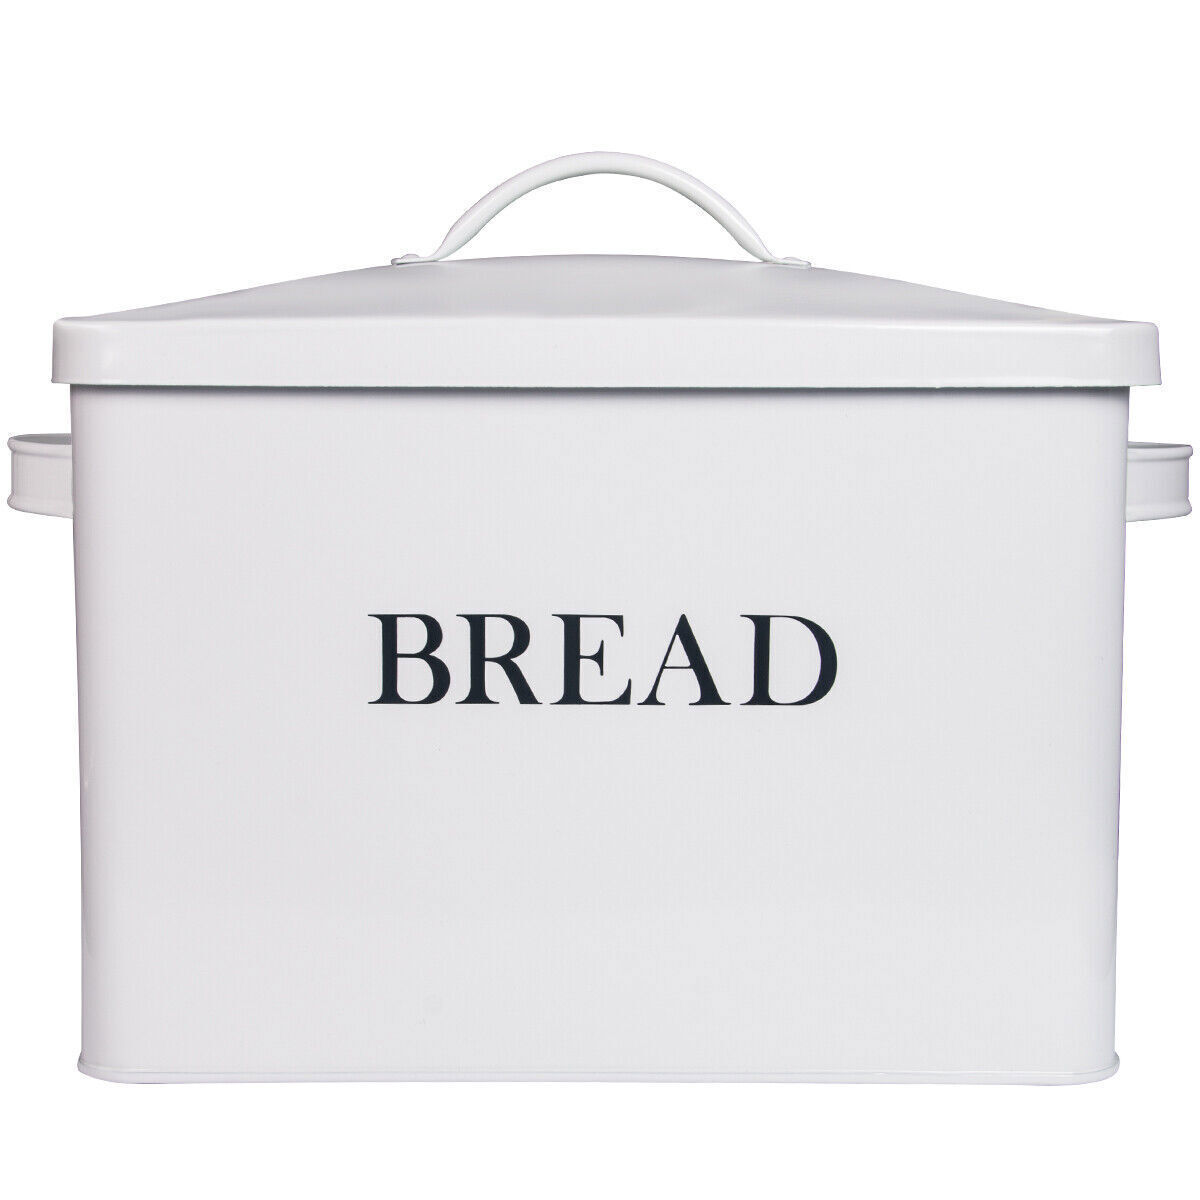 Bread Box Kitchen Countertop Large Stainless Steel Breadbox Cake Food Container